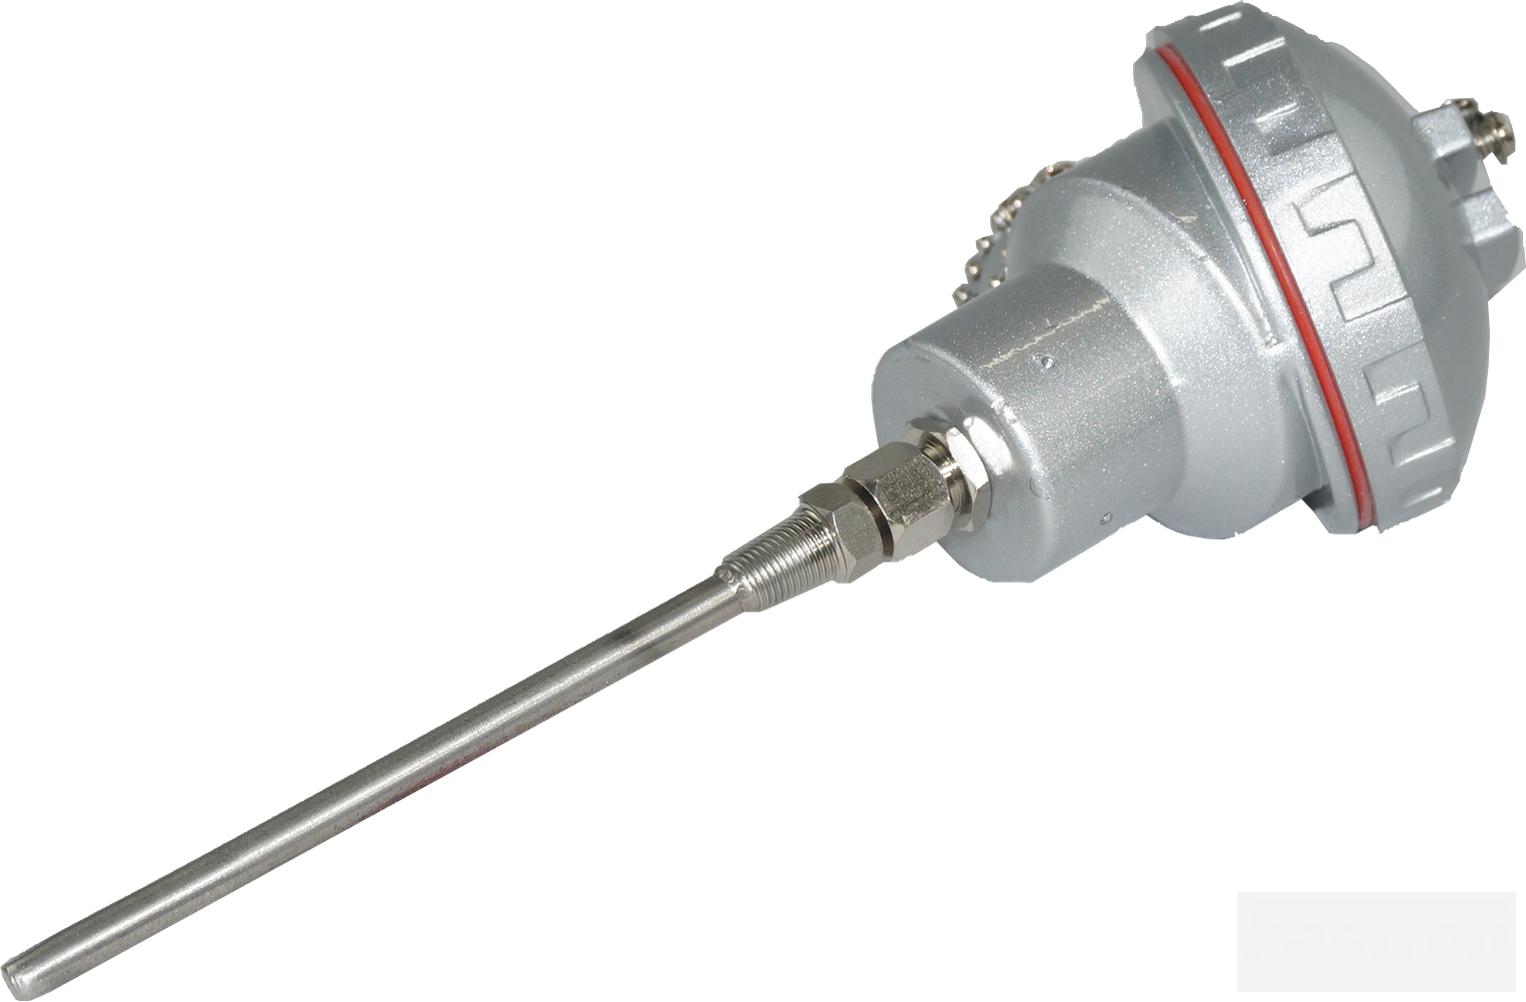 FTCK-D-6-600-XX-KSE, Duplex Type K Thermocouple MIMS Class A, 100 x 6mm Probe w/ Small Terminal Head, -20 to 1000 Deg C, CE ANSI ROHS Approved-Temperature Sensor-Fastron Electronics-Fastron Electronics Store